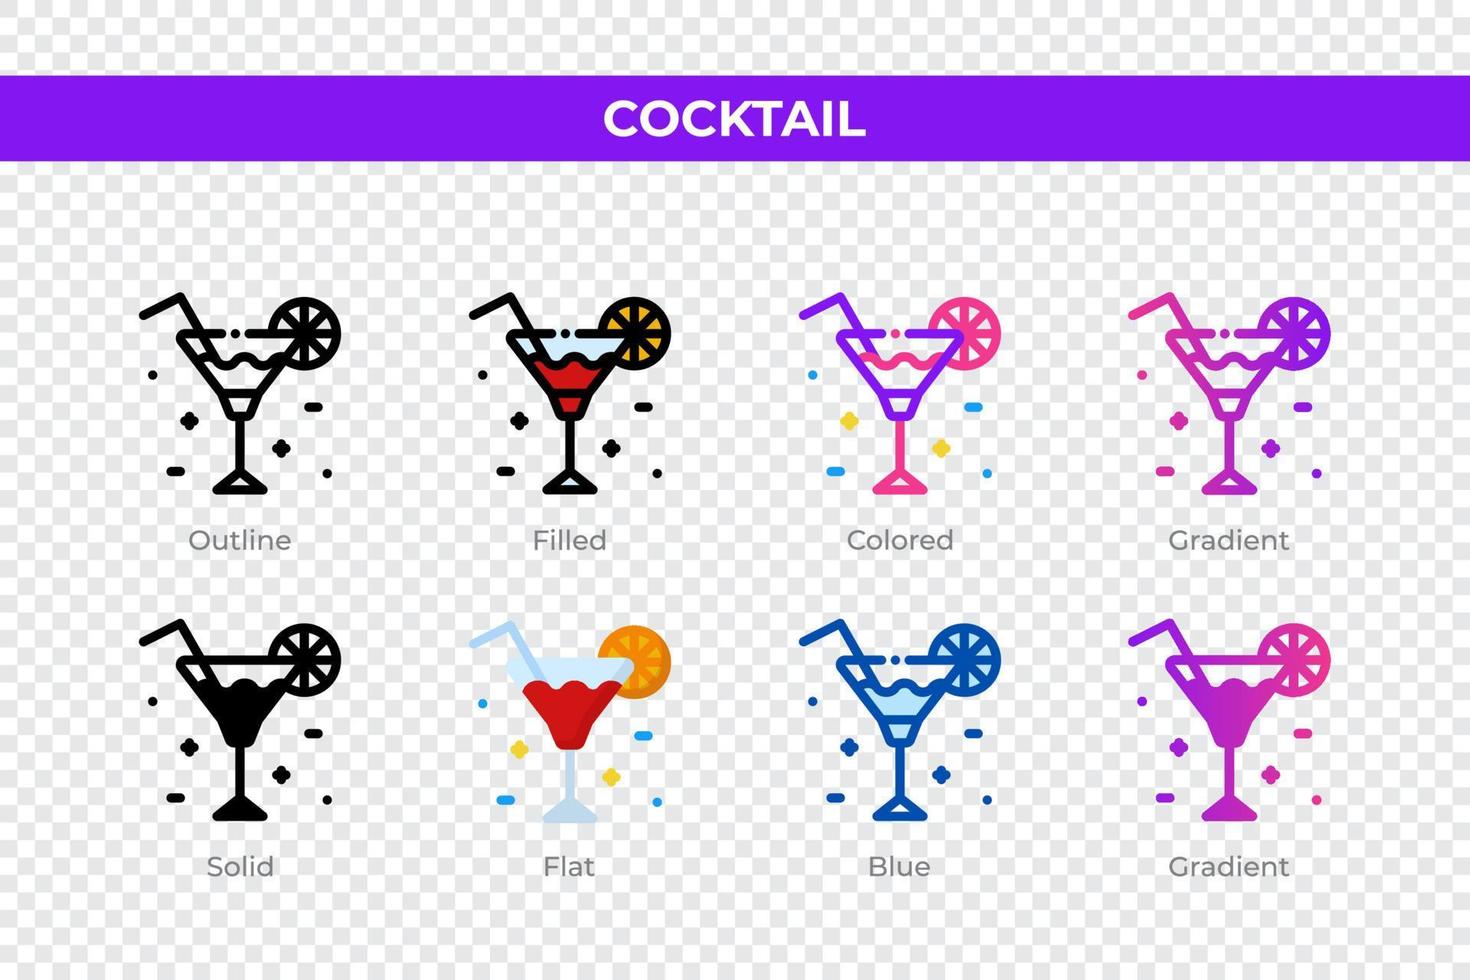 Cocktail icons in different style. Cocktail icons set. Holiday symbol. Different style icons set. Vector illustration